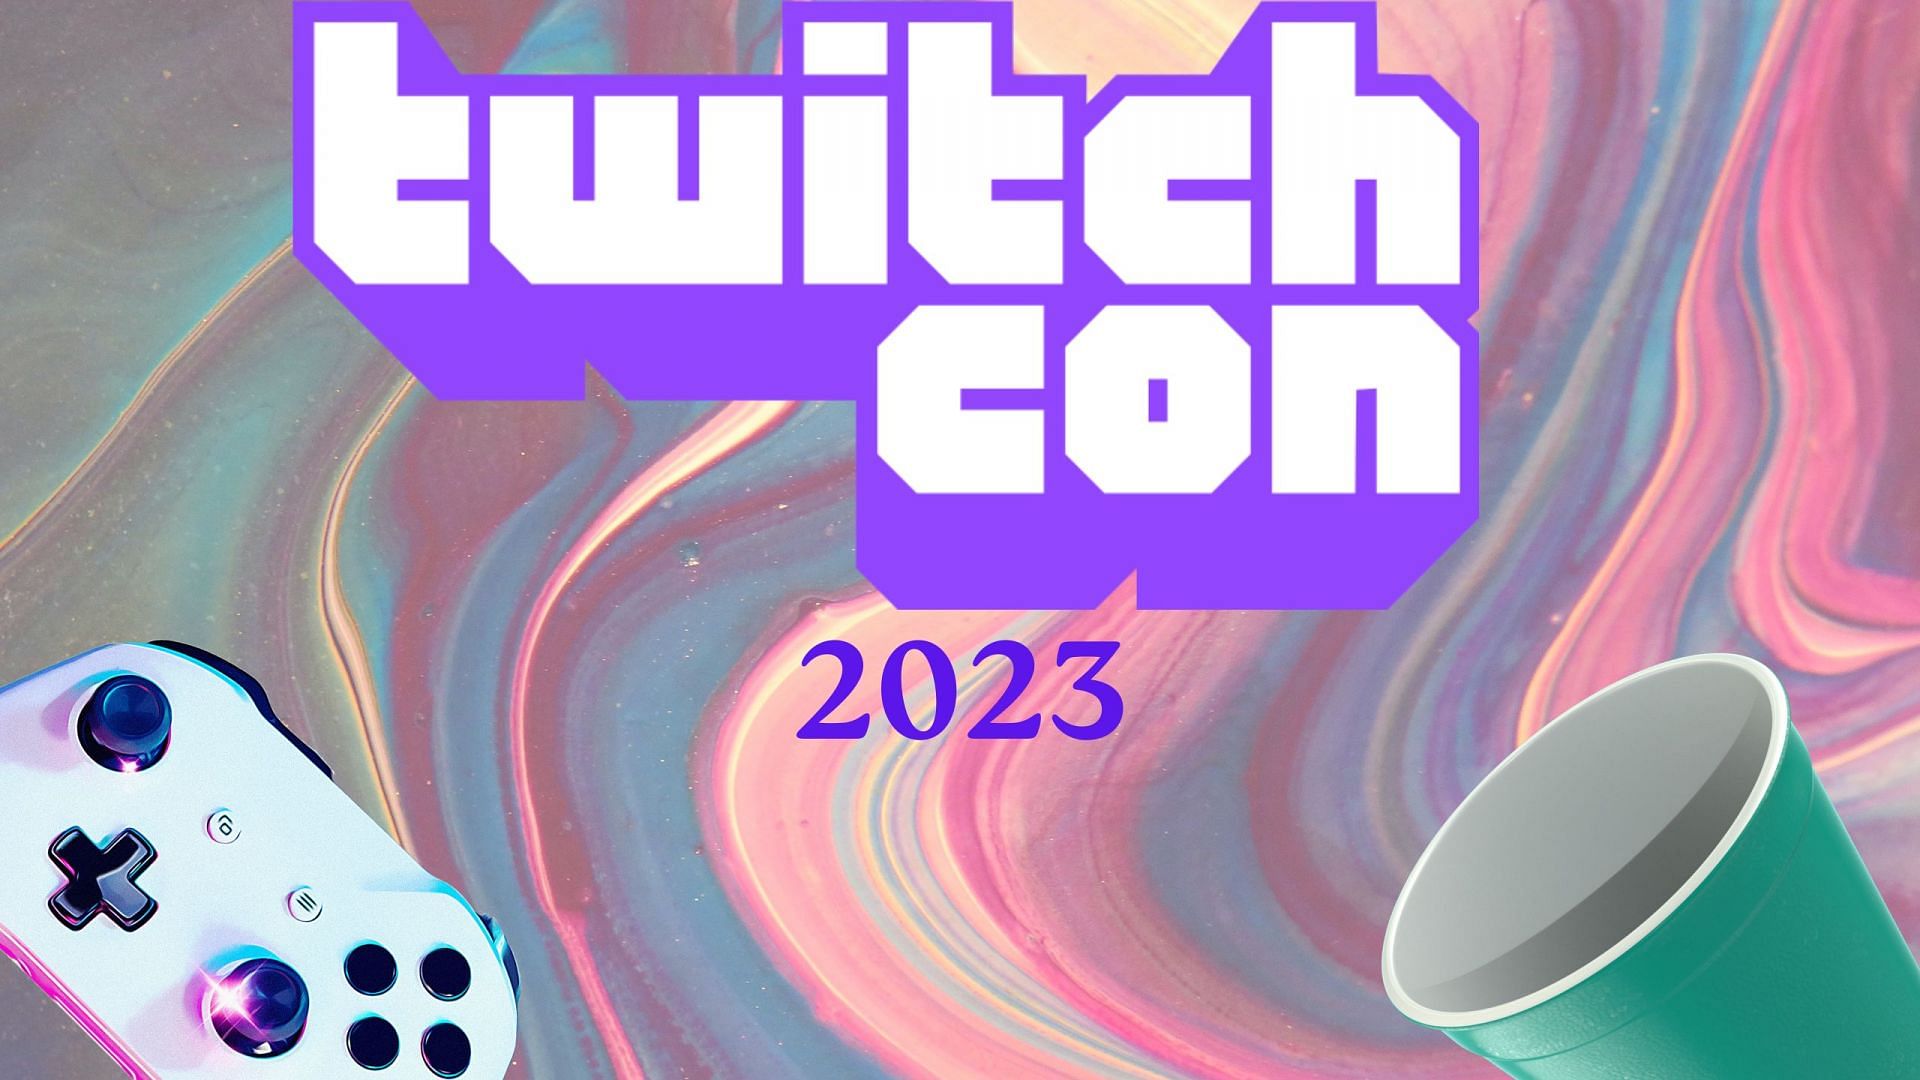 TwitchCon 2023 dates, host cities, and more revealed